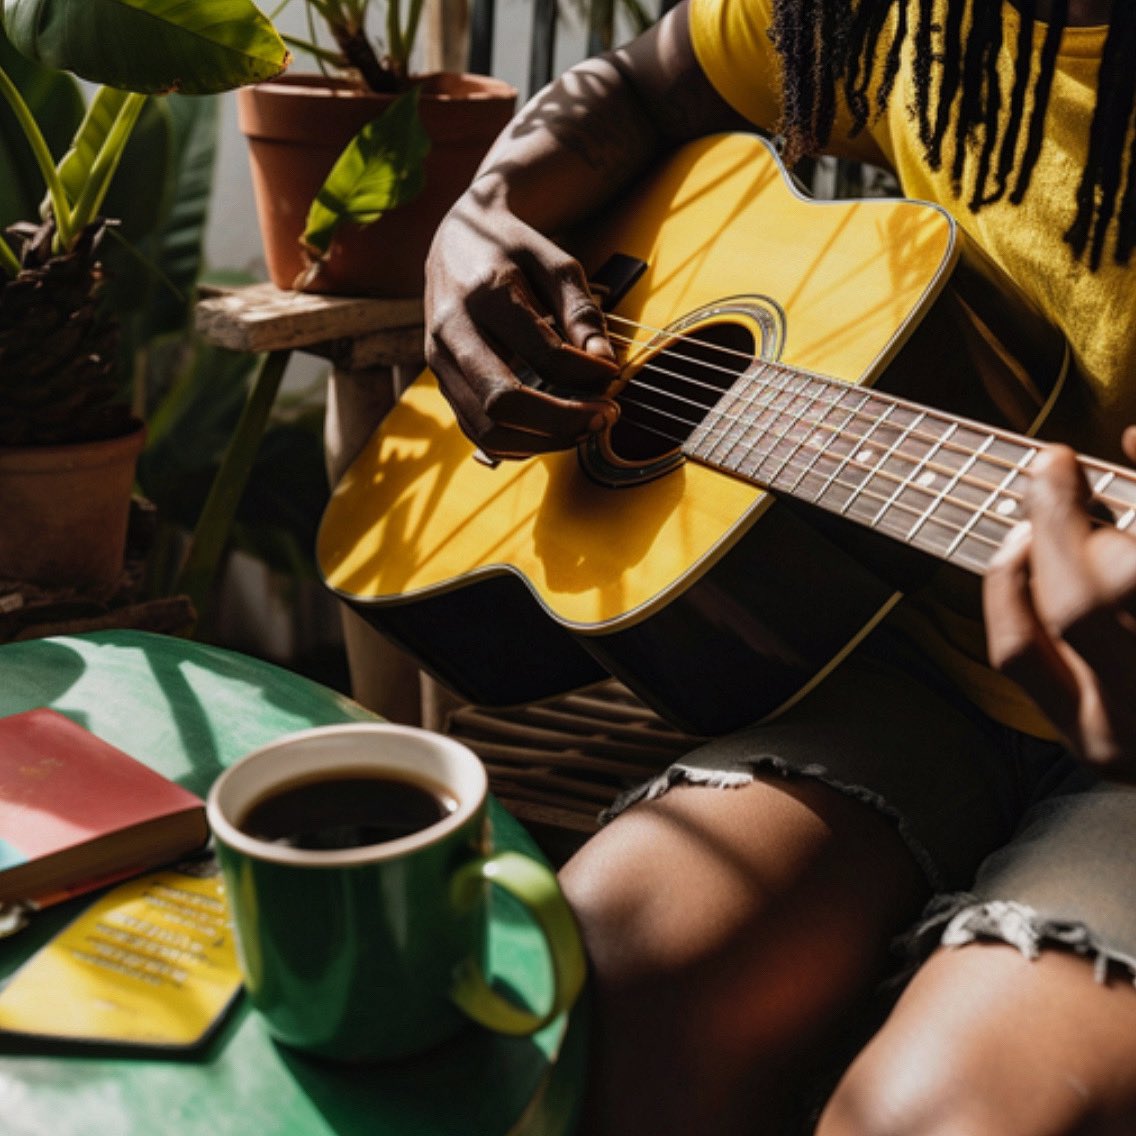 Fuel your day with the harmonious blend of coffee and music - one wakes the soul, the other, the senses. 🎶🌟☕ There’s a blend to suit whatever your vibe is each day - shop the full assortment in grocery stores in Canada, or online through Amazon in Canada & the US.